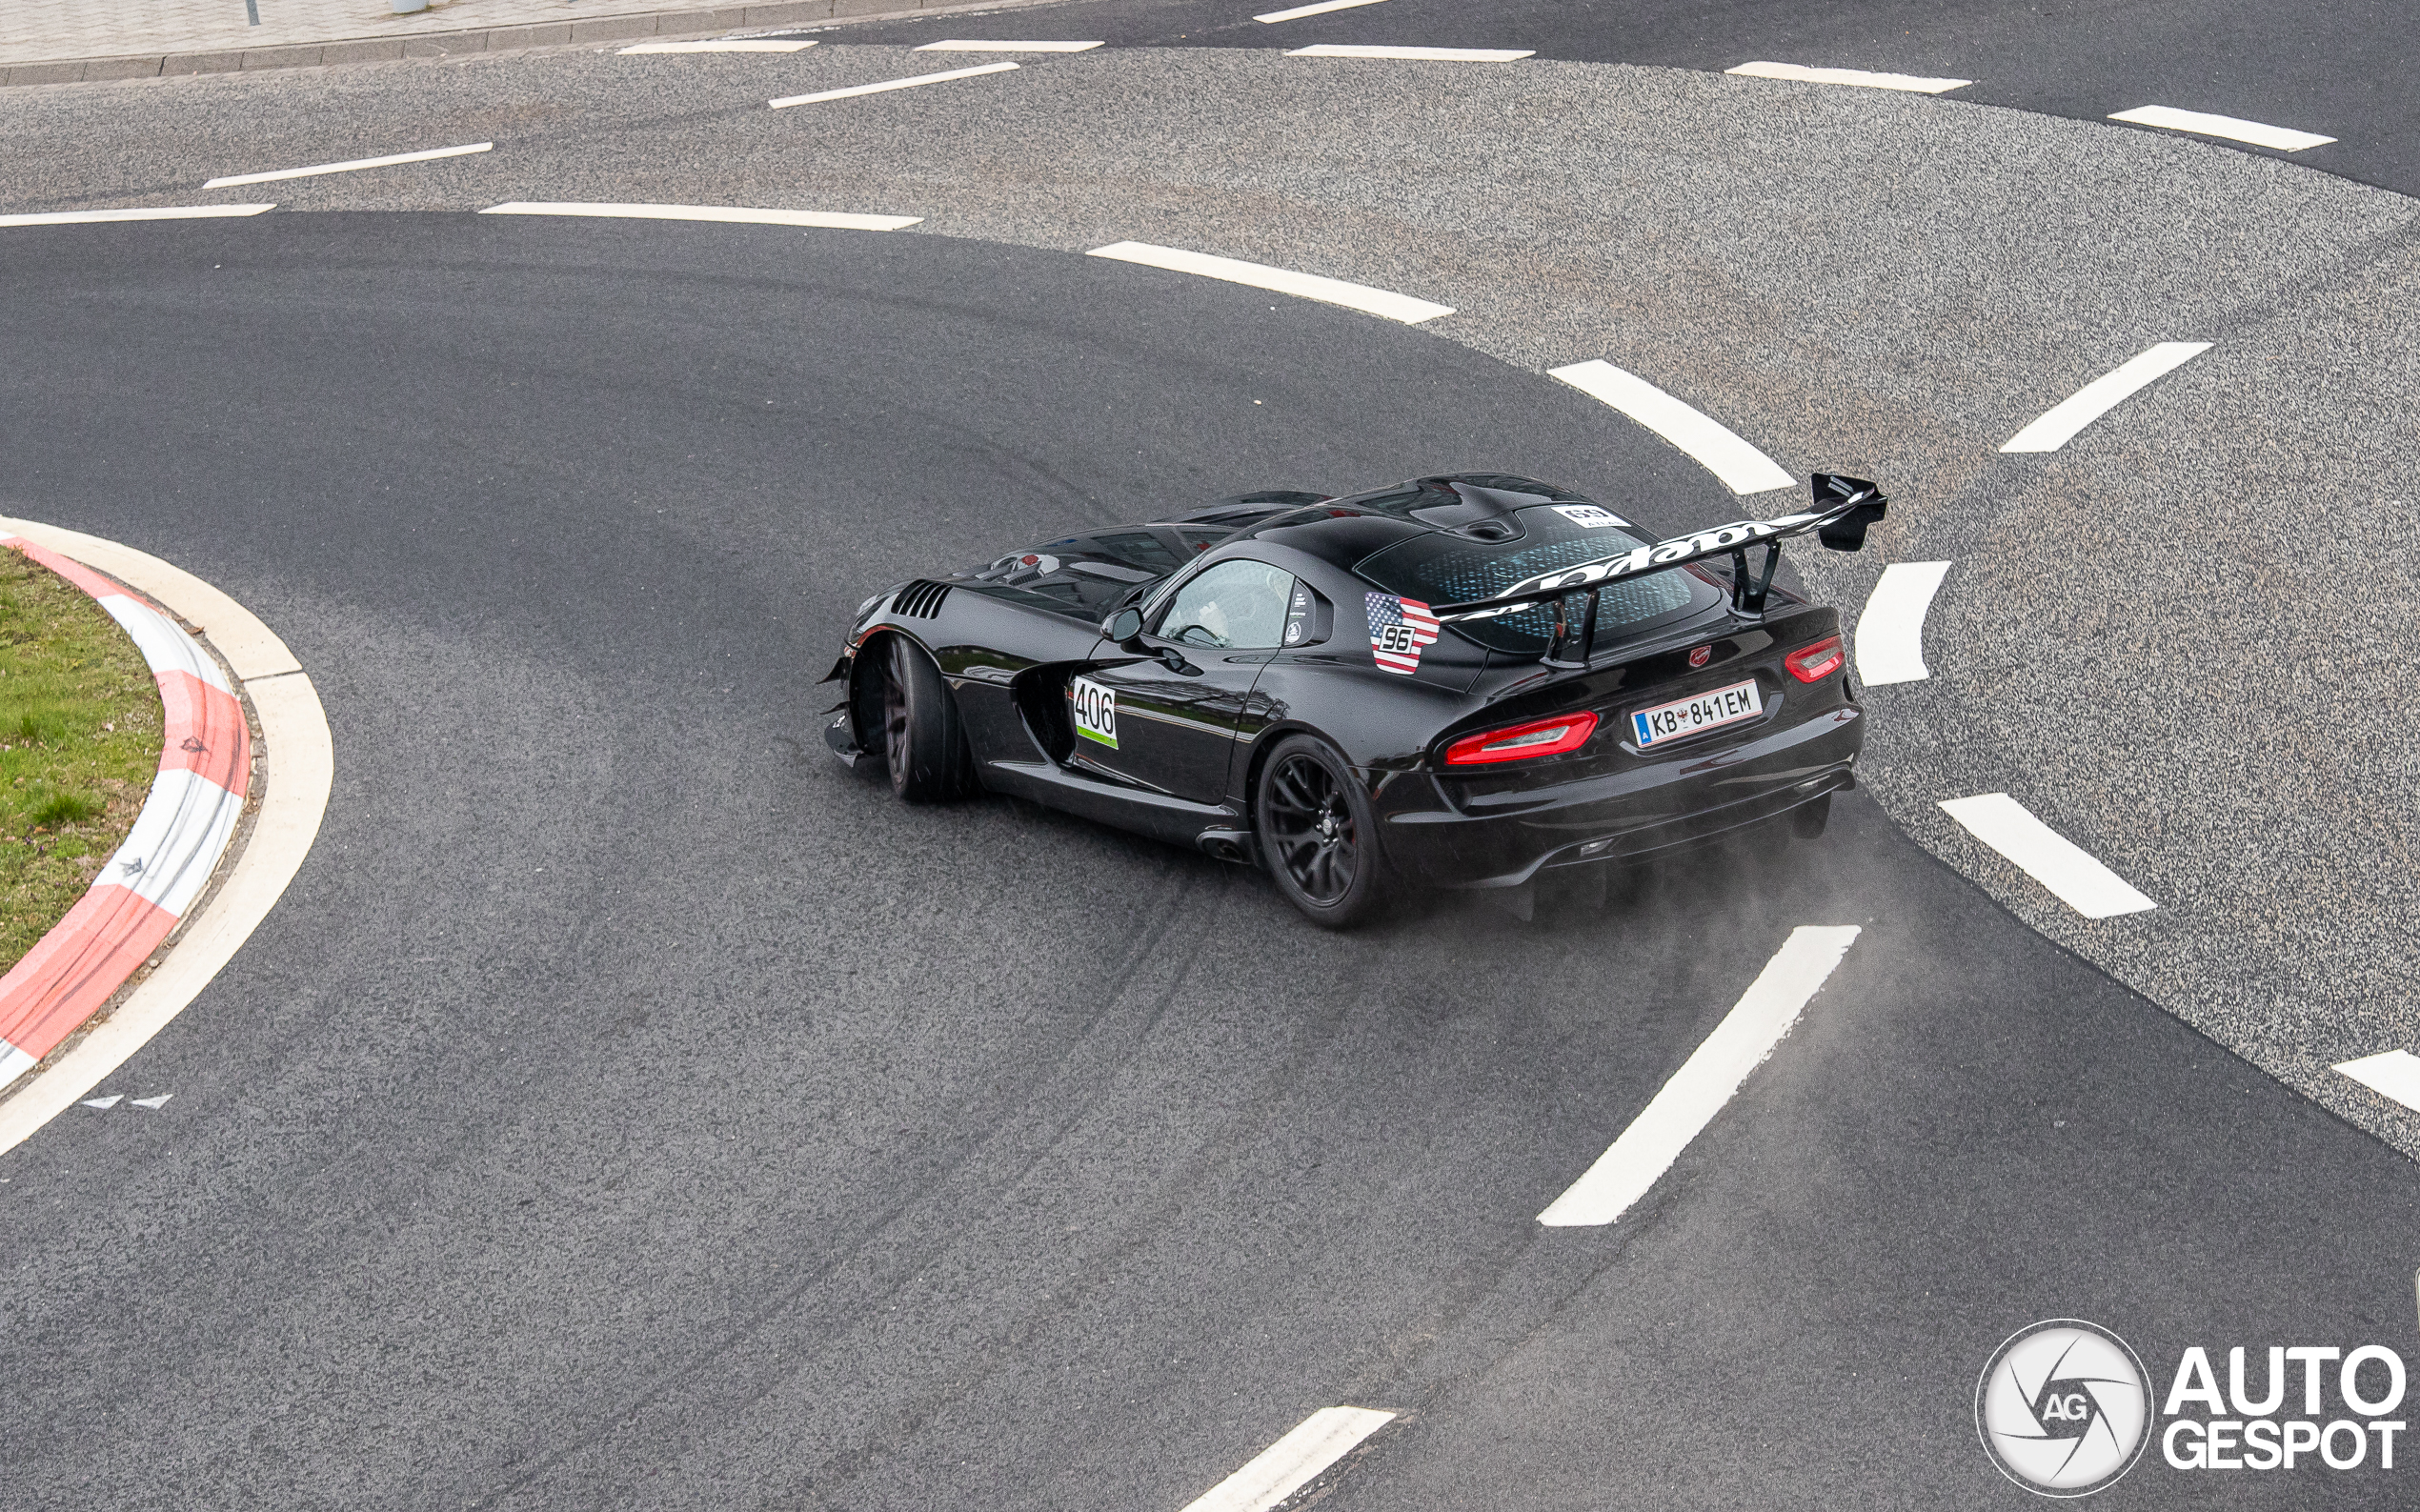 This is how you should drive around with a Viper!